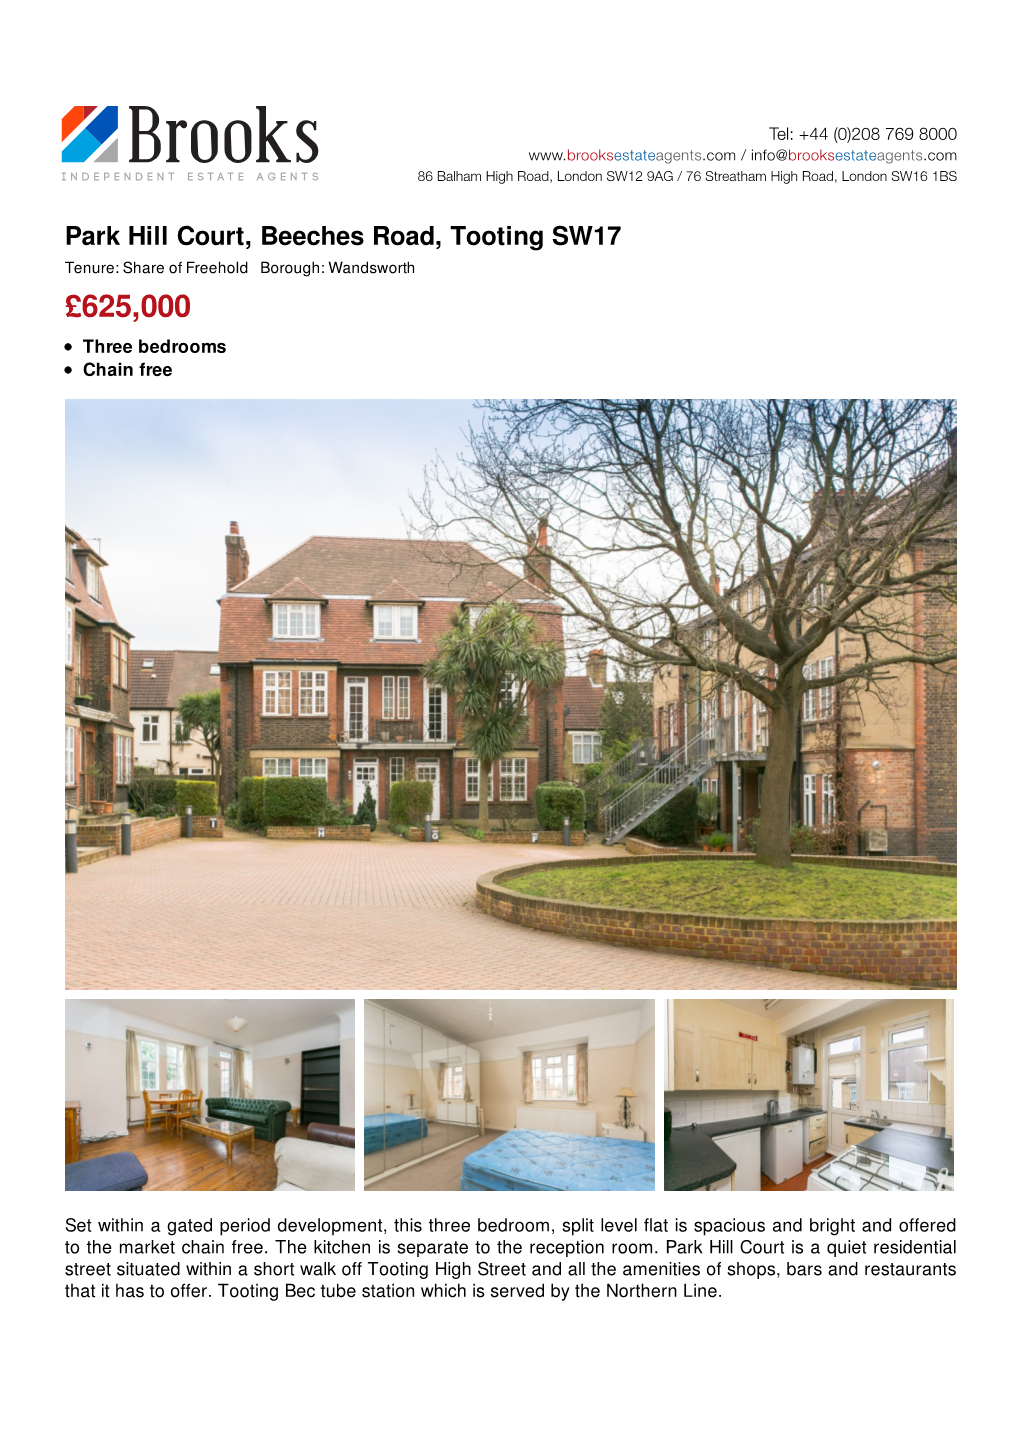 Park Hill Court, Beeches Road, Tooting SW17 Tenure: Share of Freehold Borough: Wandsworth £625,000 Three Bedrooms Chain Free